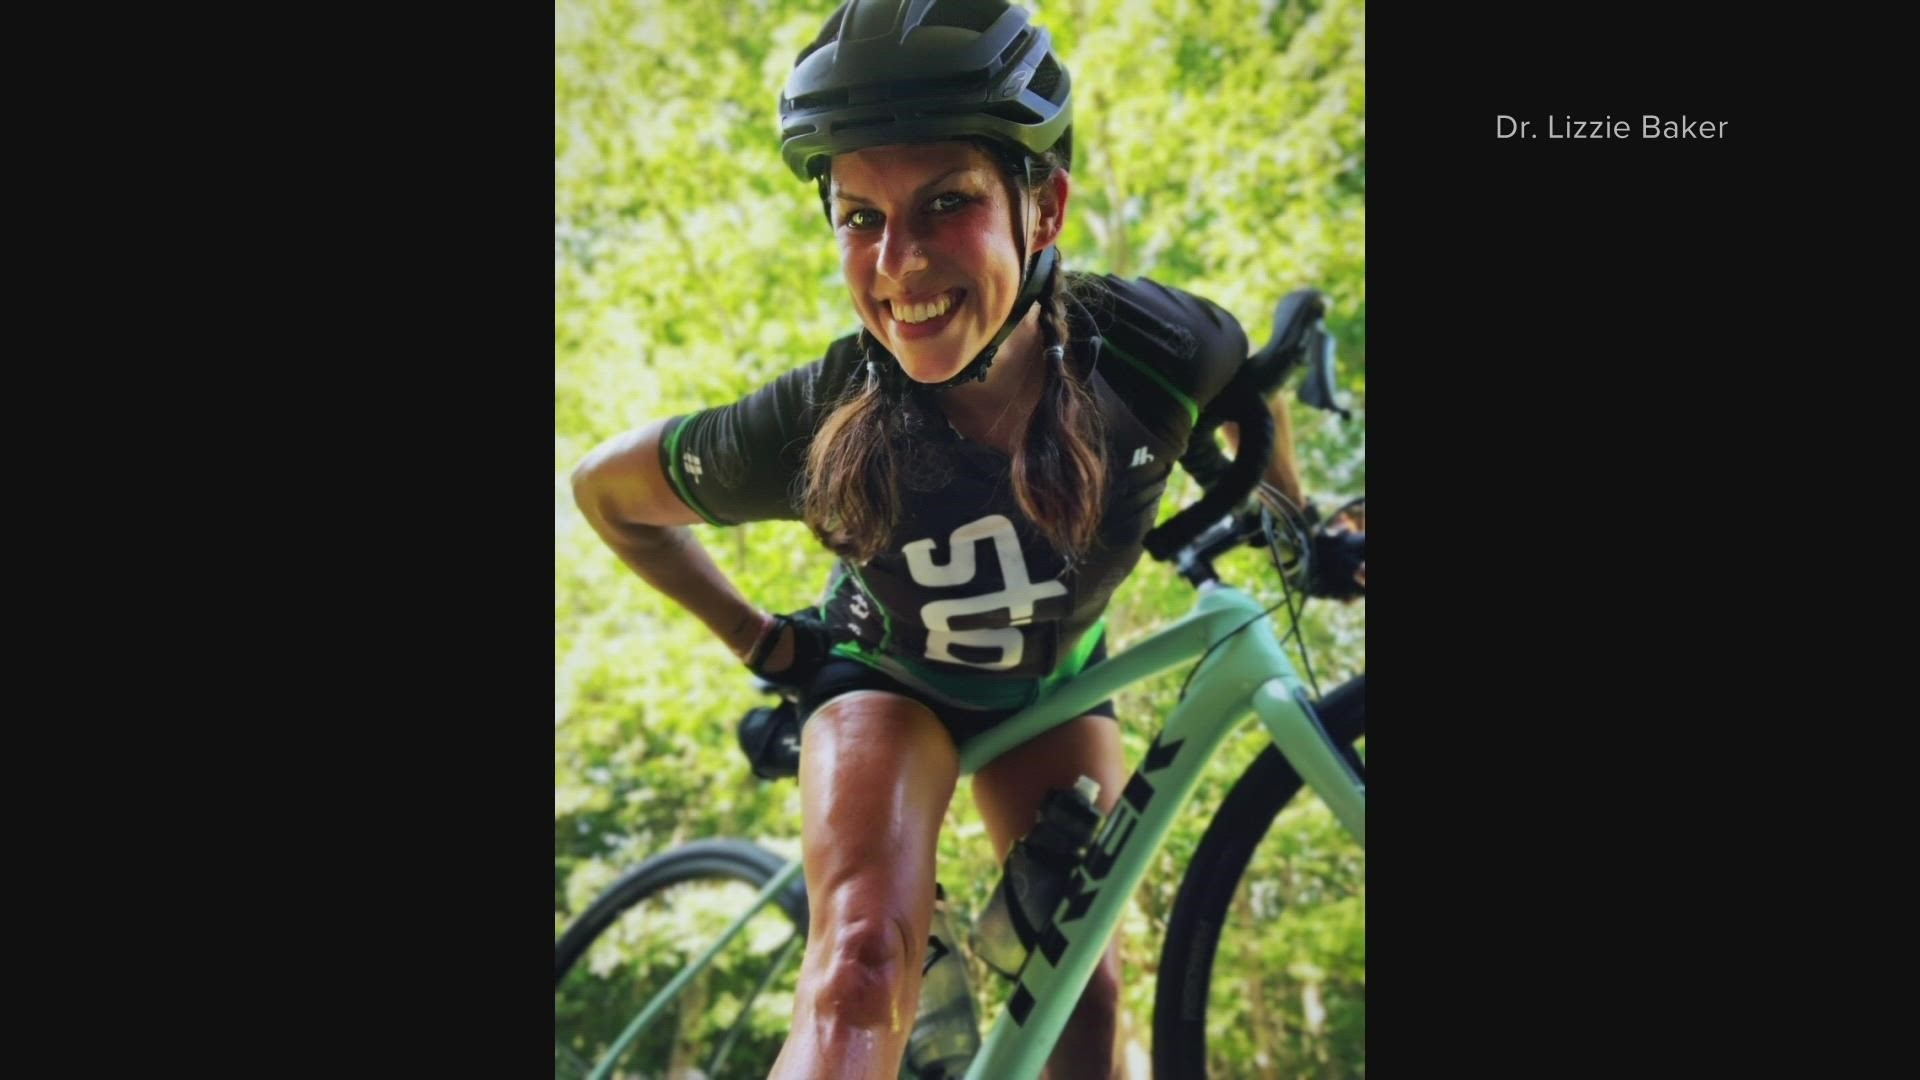 Dr. Lizzie Baker has been biking in the annual Dempsey Challenge for six years. She's inspired by her mother, who was diagnosed with terminal cancer.